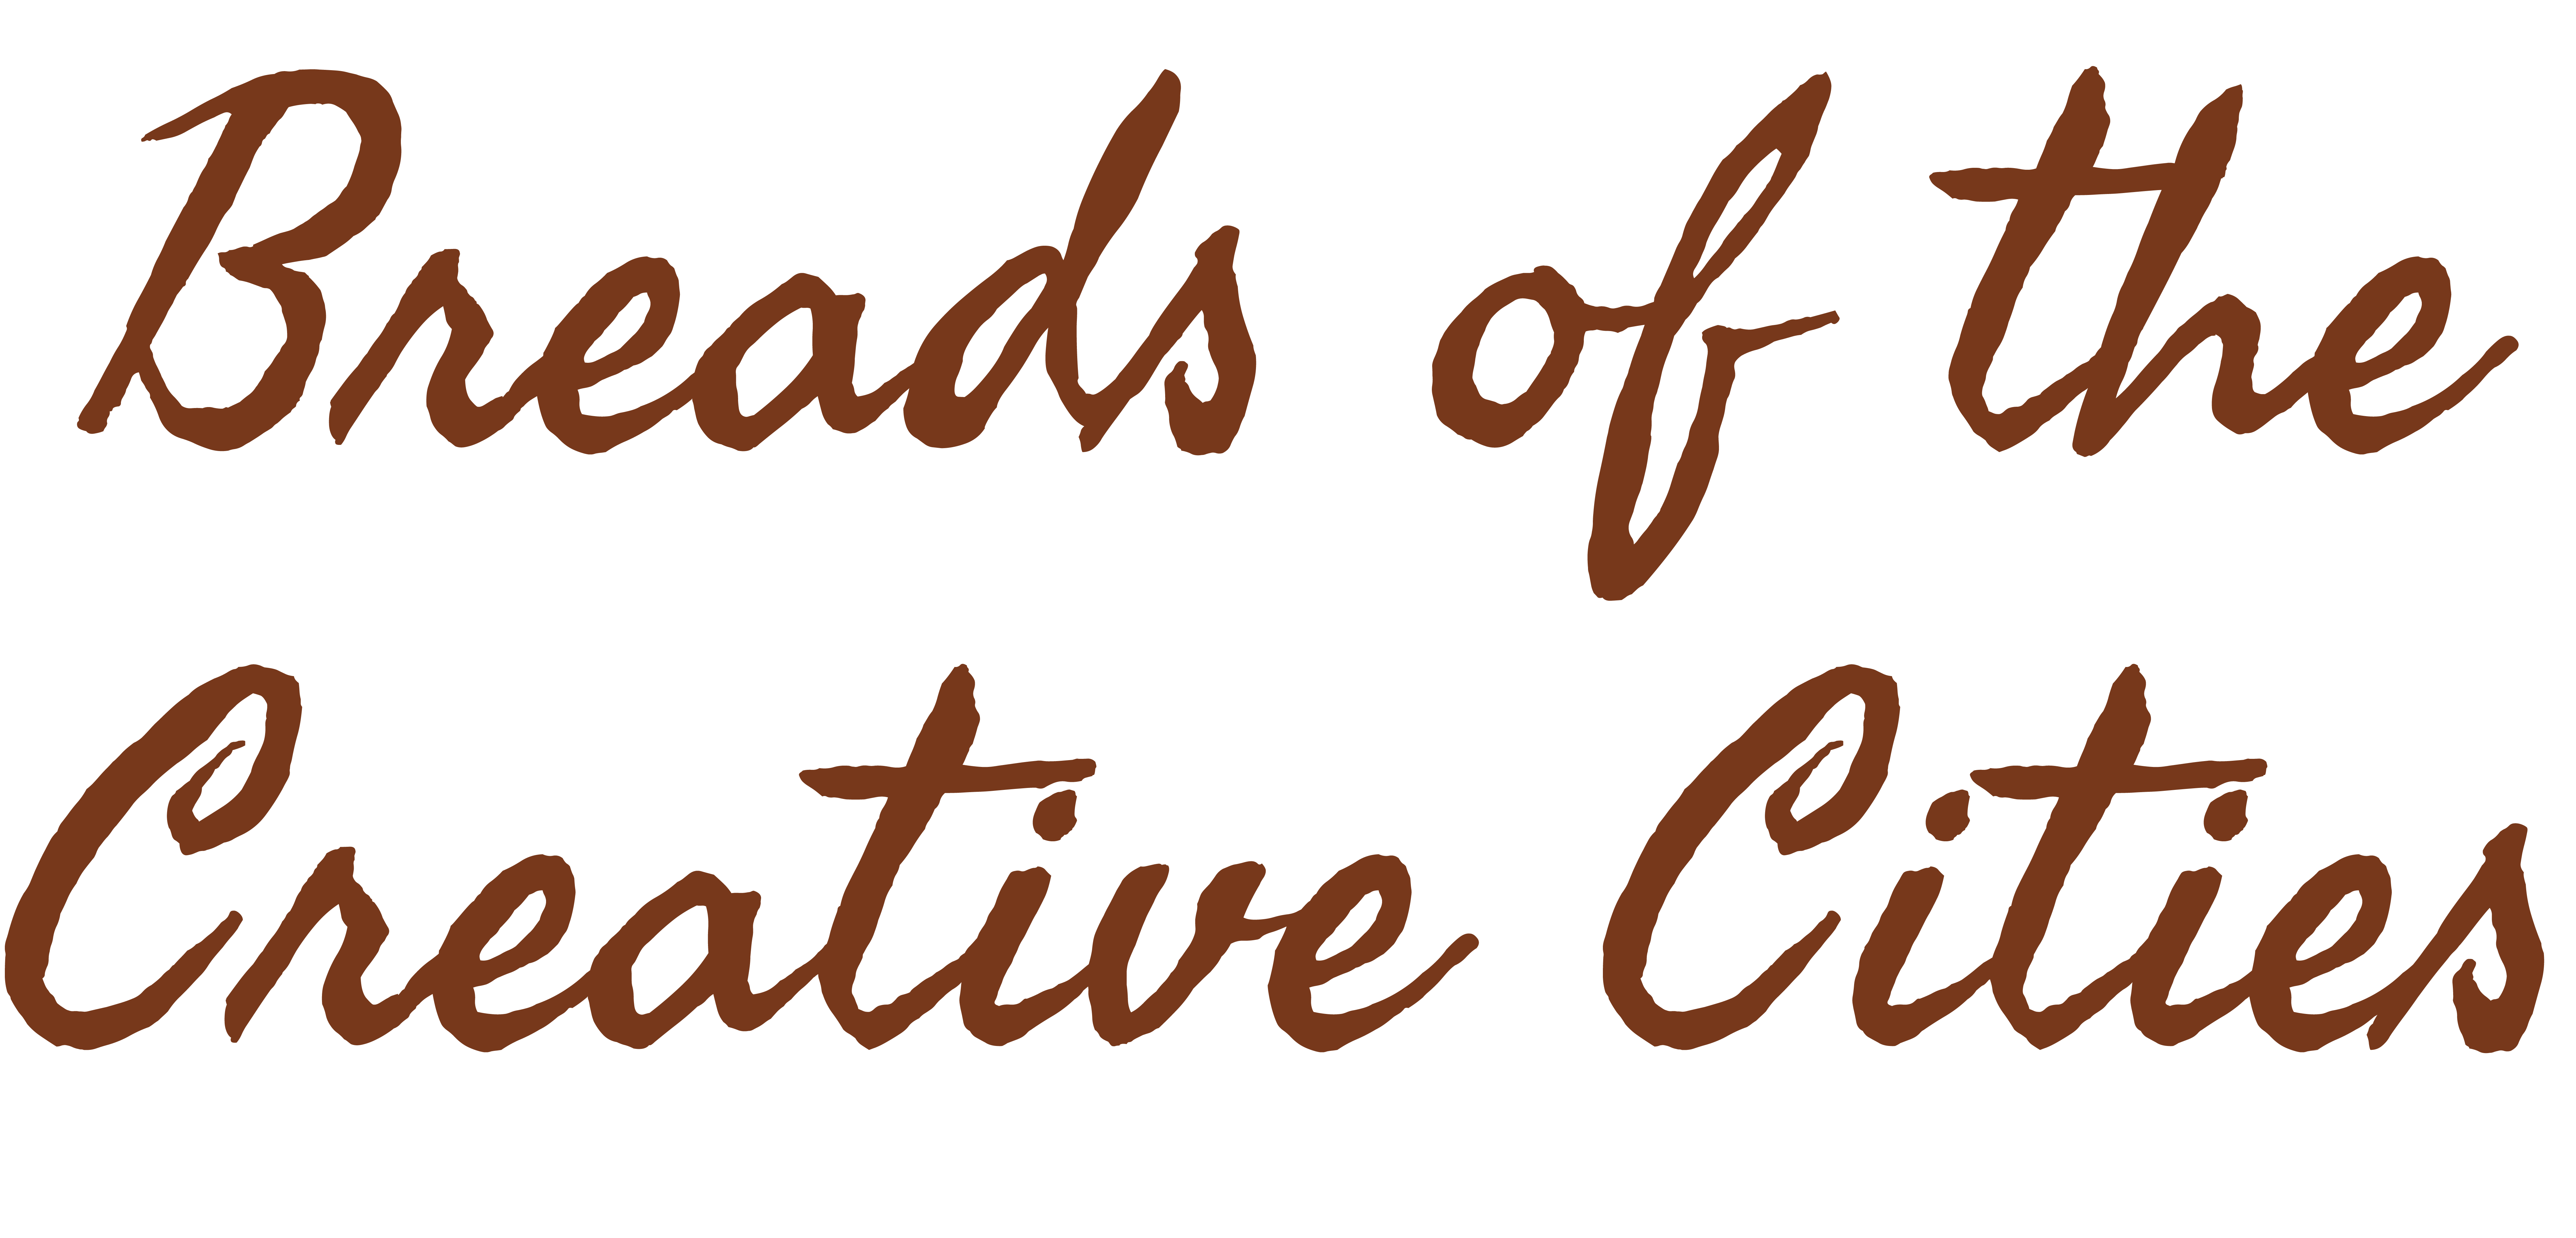 Breads of the Creative Cities logo